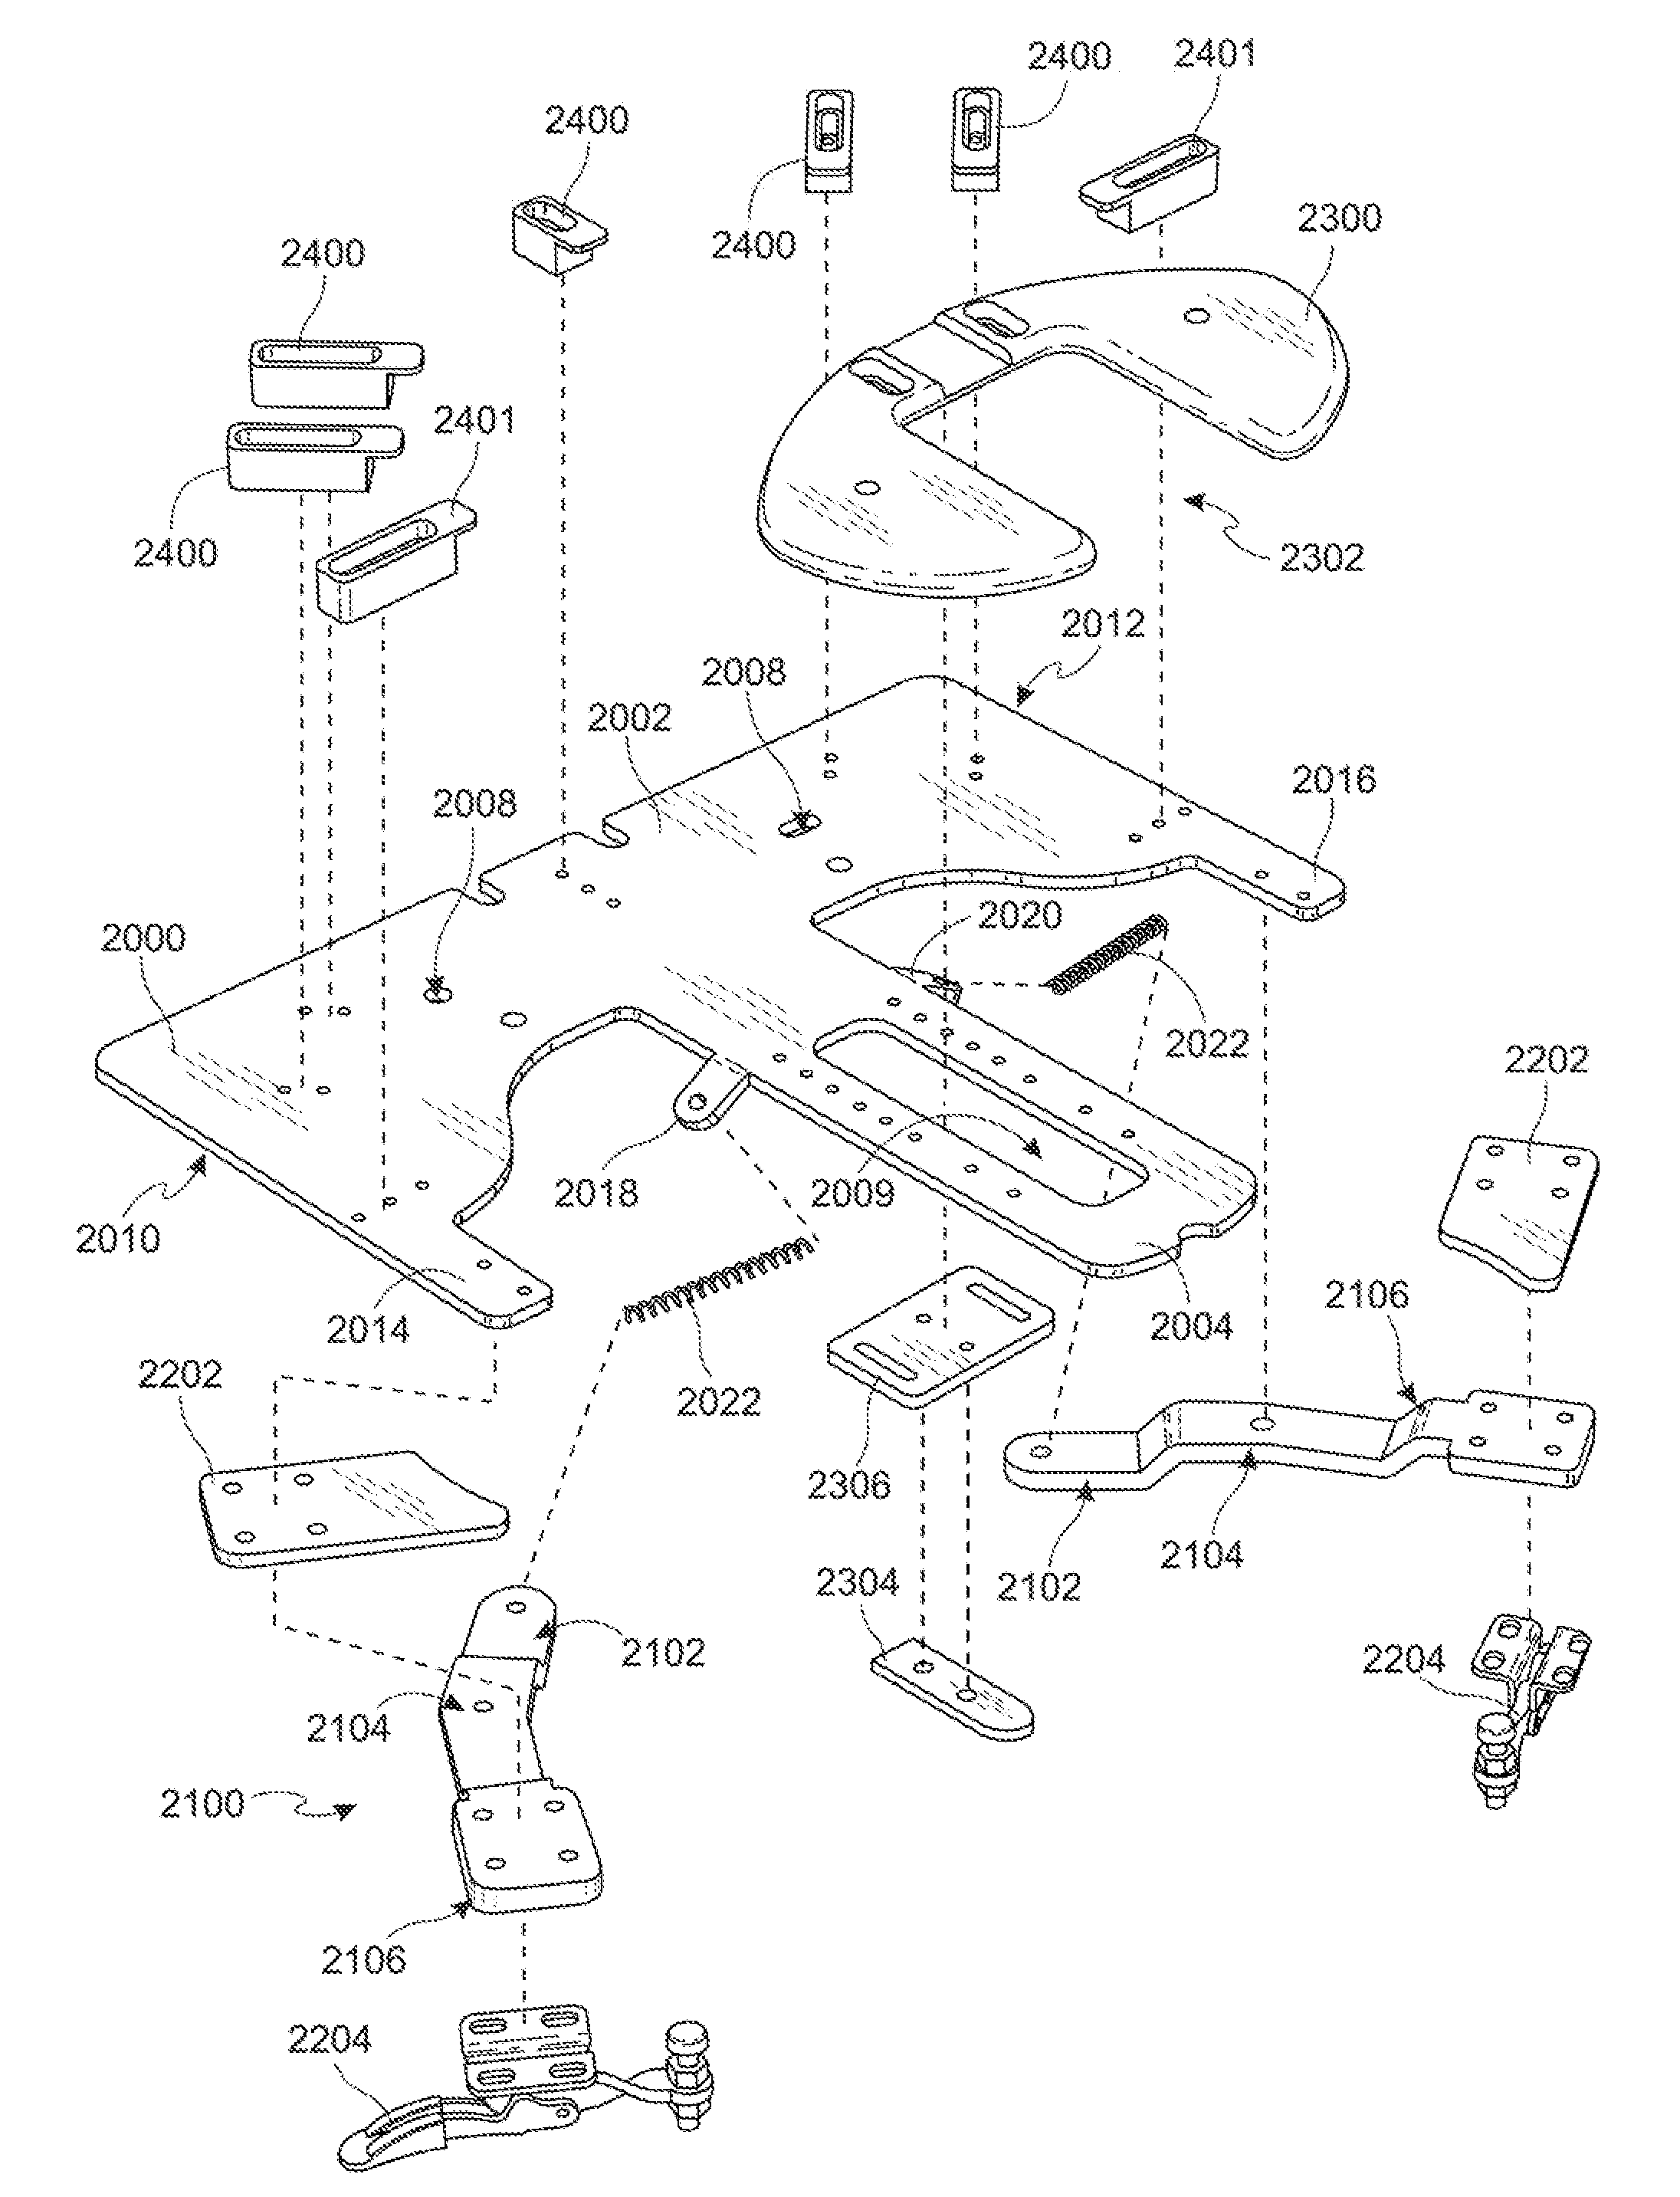 System and method for printing customized graphics on caps and other articles of clothing